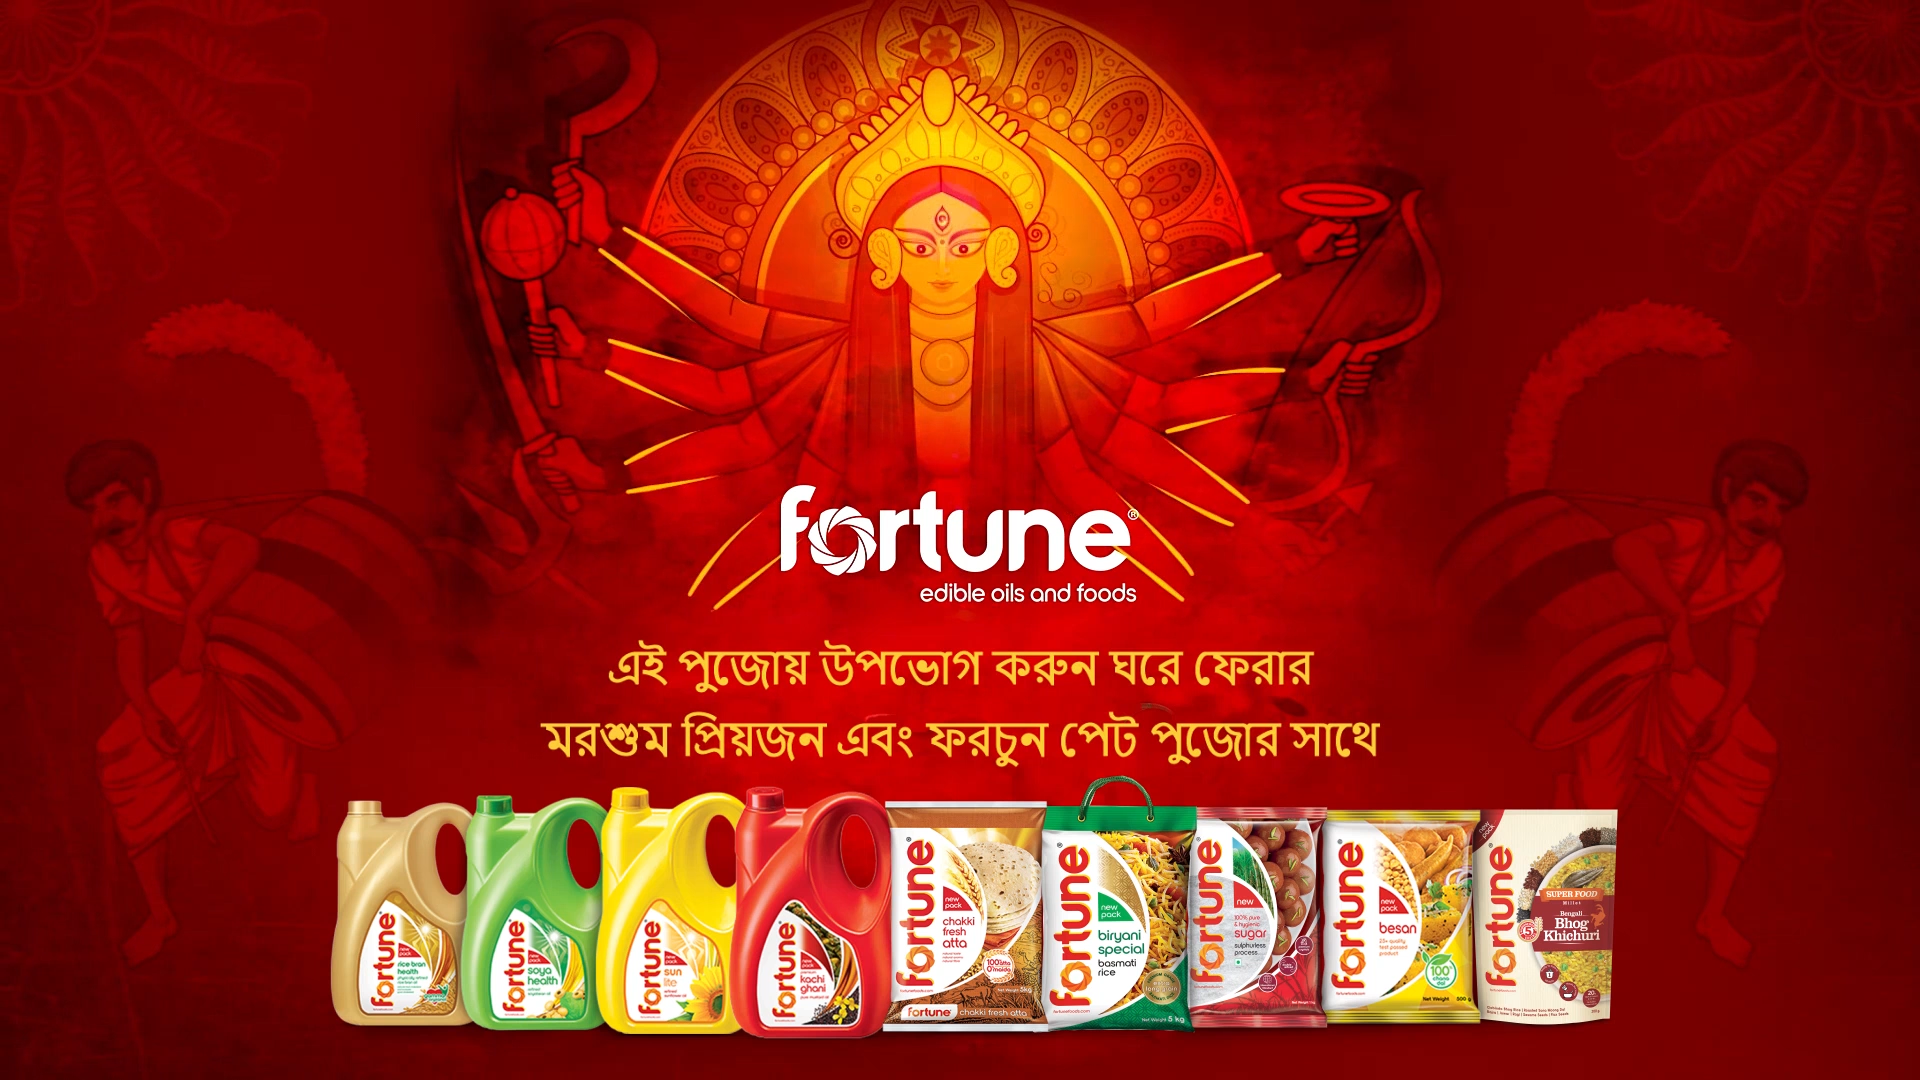 Fortune Foods Releases Pet Pujo 2022 Commercial: Harks Back to the Good Old Times of Durga Pujo Celebration 